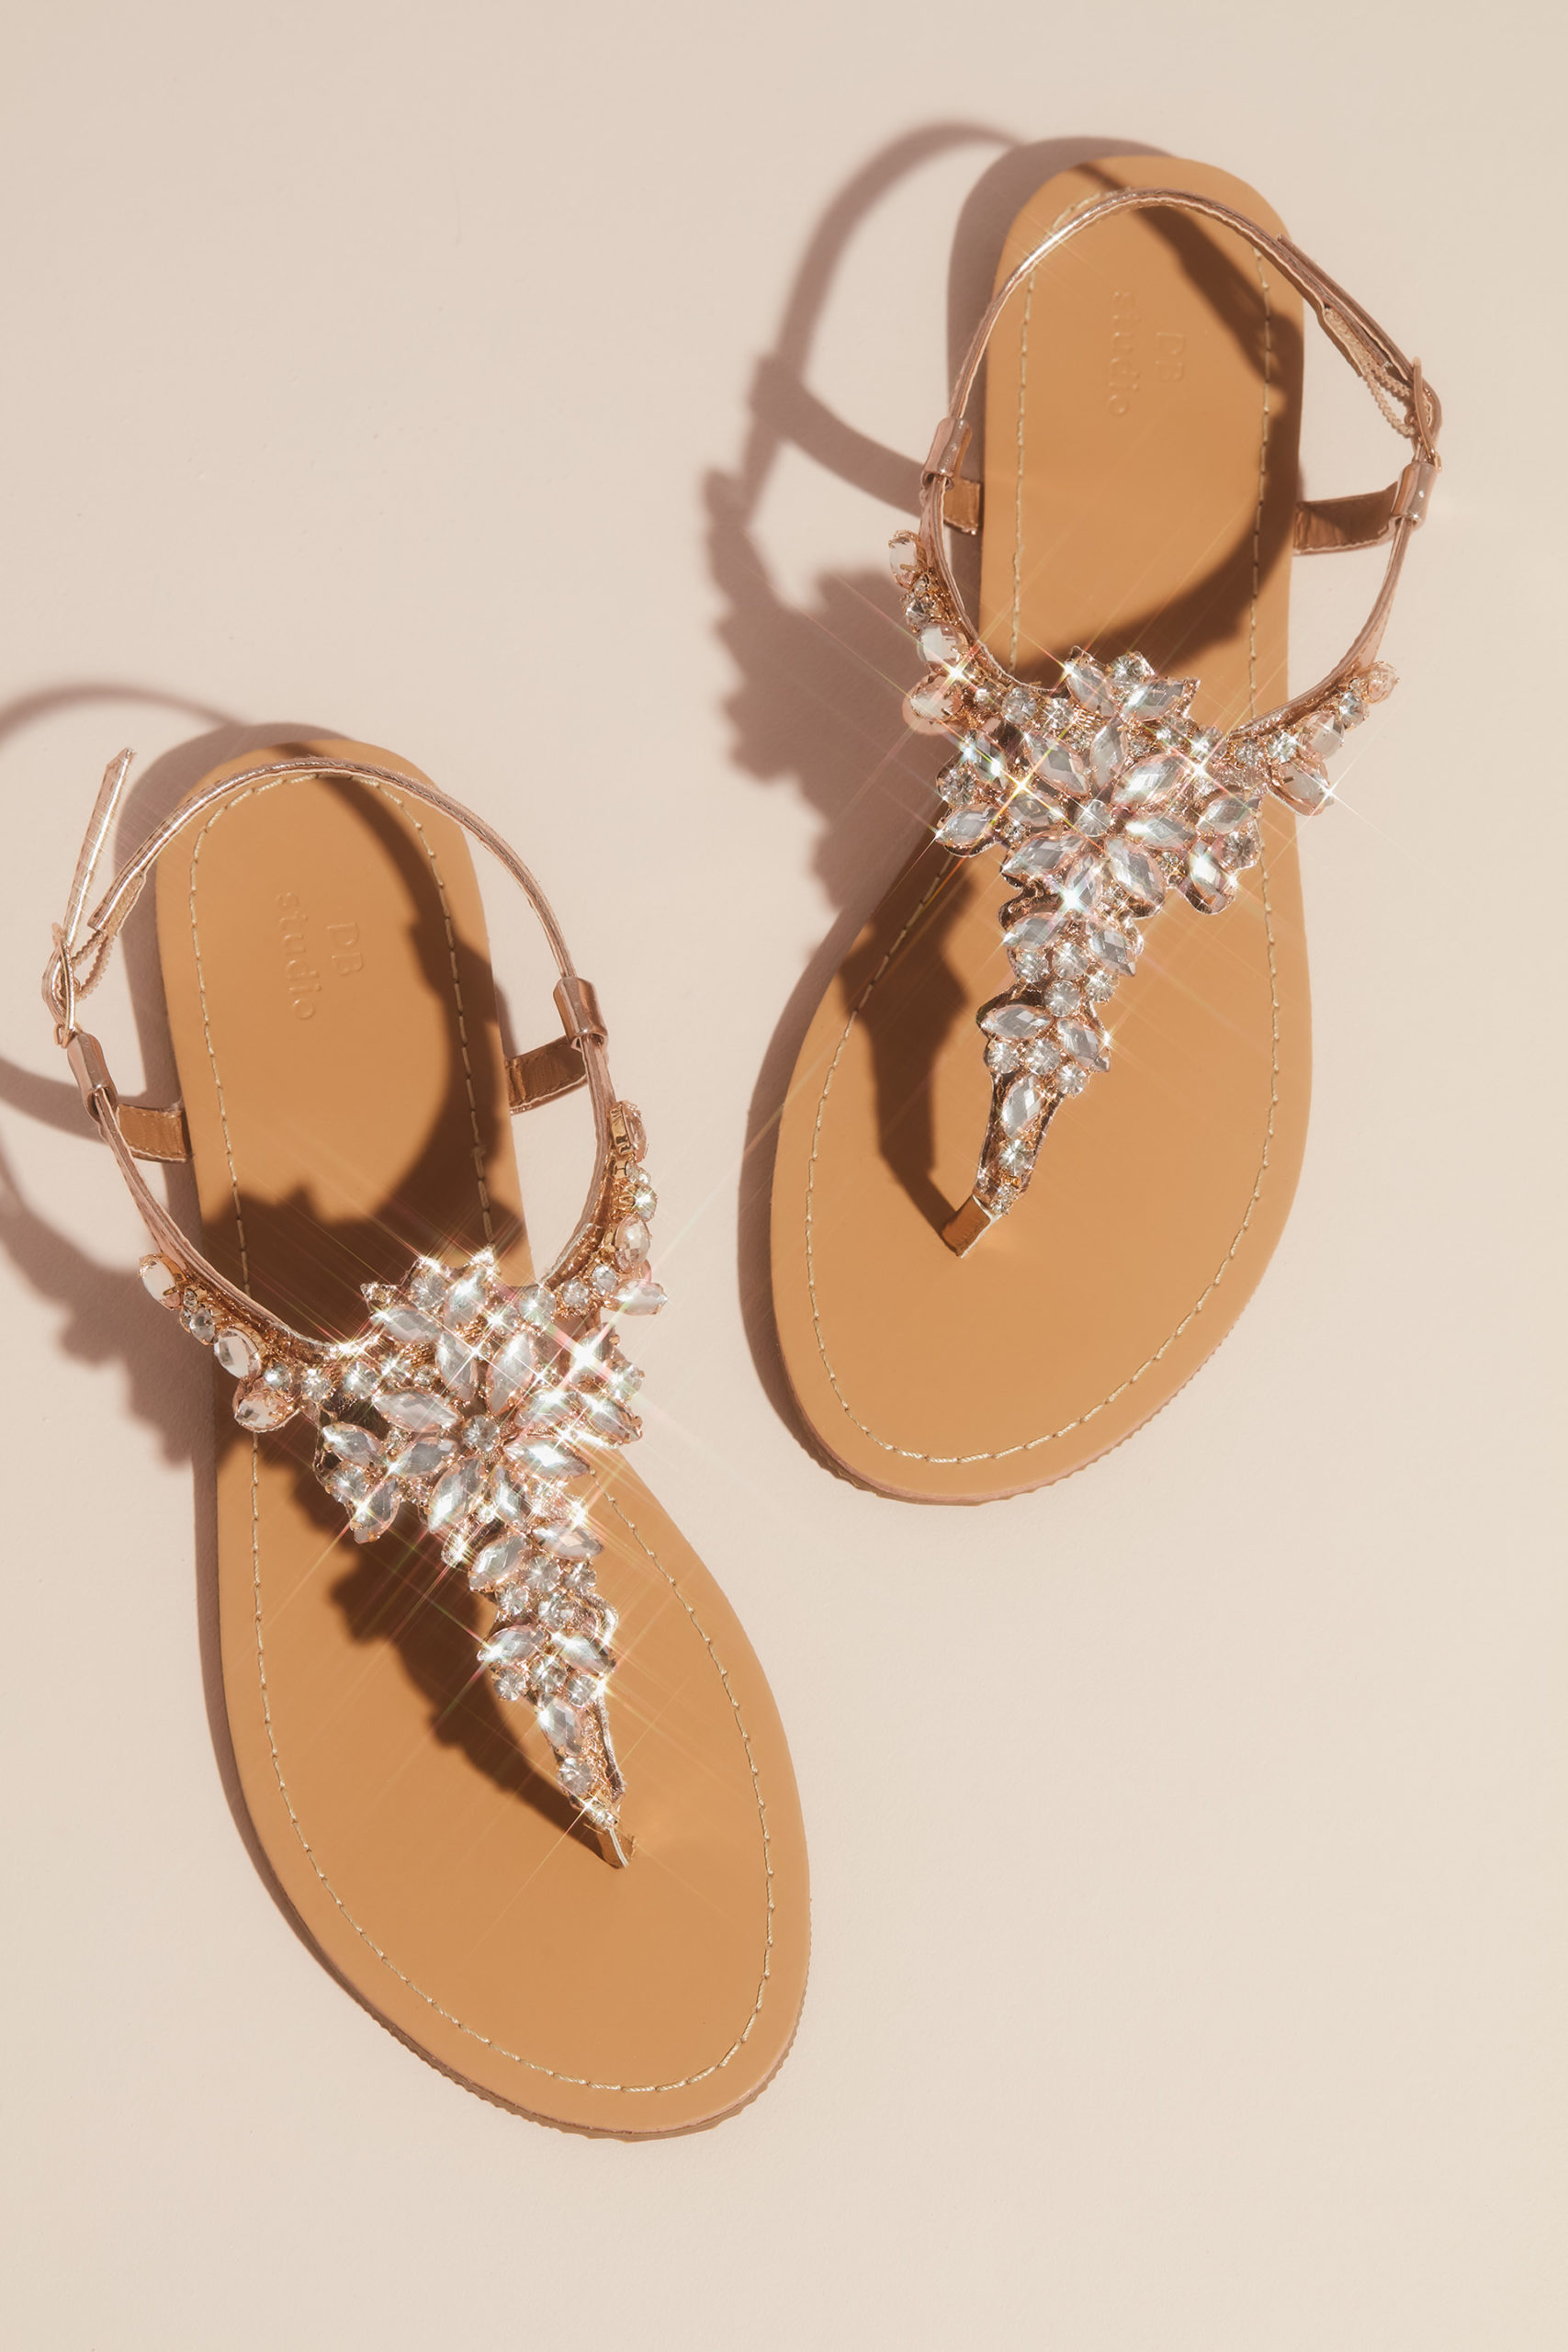 crystal thong sandals - outdoor wedding shoes